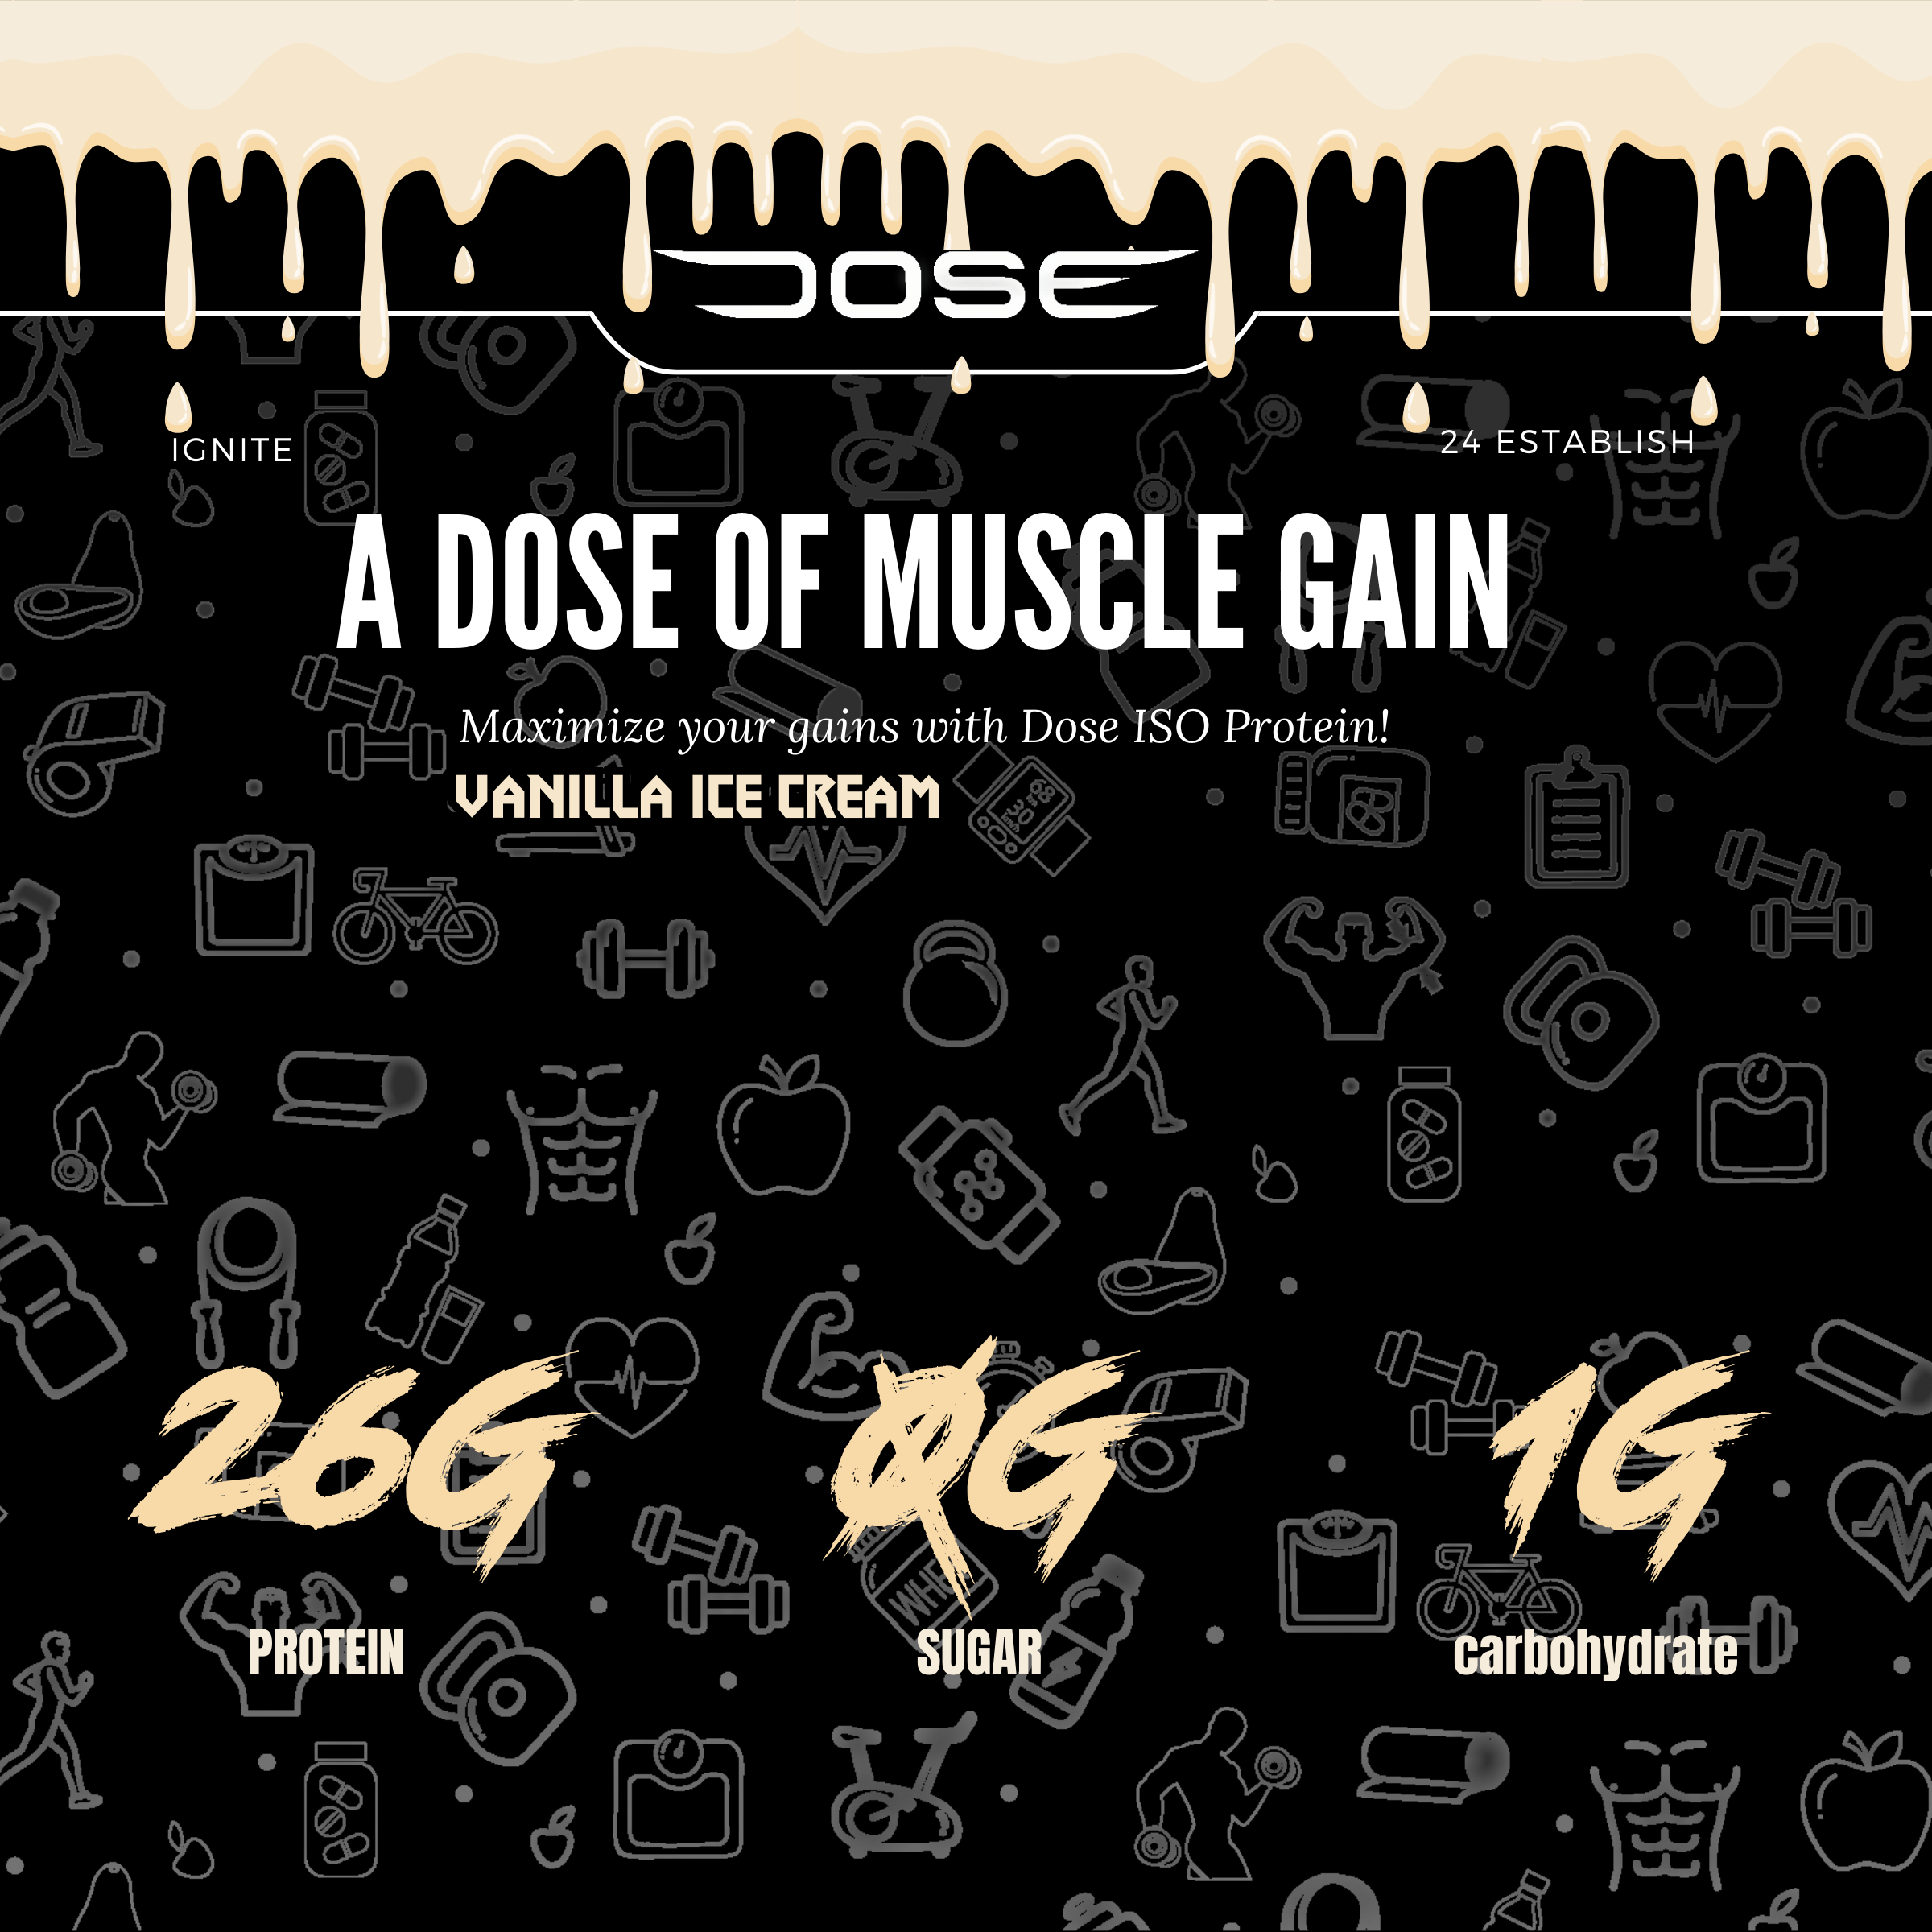 Dose Fuel Vanilla Ice Cream Protein Powder - 26g Protein, 0g Sugar, 1g Carbohydrate, Maximize Gains with Dose ISO Protein